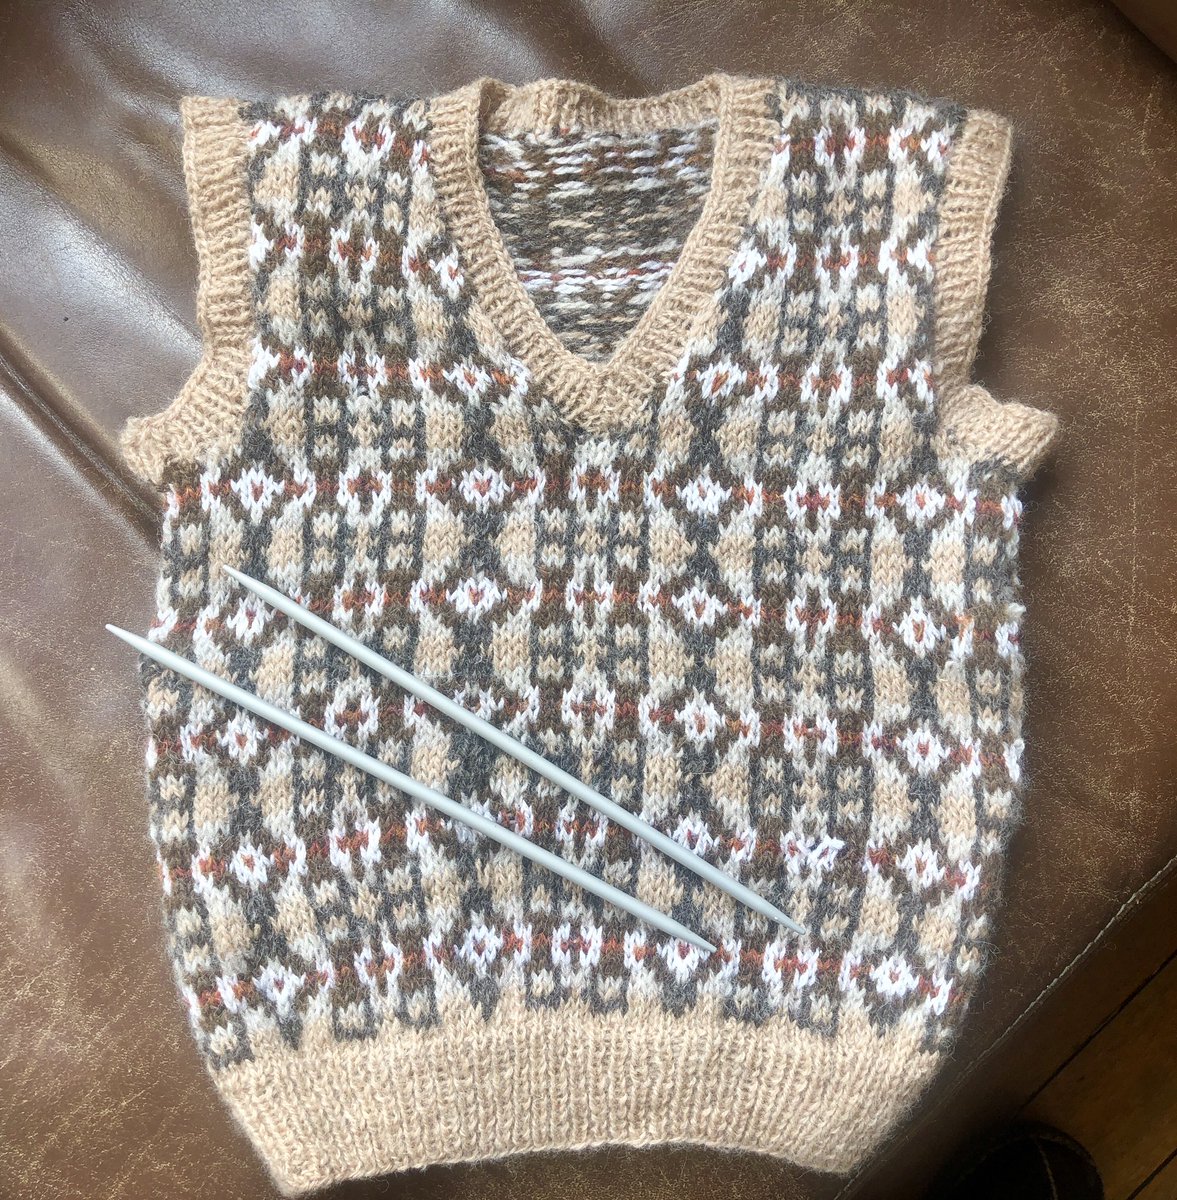 Fatigue has driven me to sit down and knit. This is a peerie mootie (very small) Fairisle pullover. I forgot how enjoyable and distracting knitting can be. So there cancer!  I may have cancer but cancer hasn’t got me yet. #Shetland #knitting #shetlandwoolweek #fairisle #